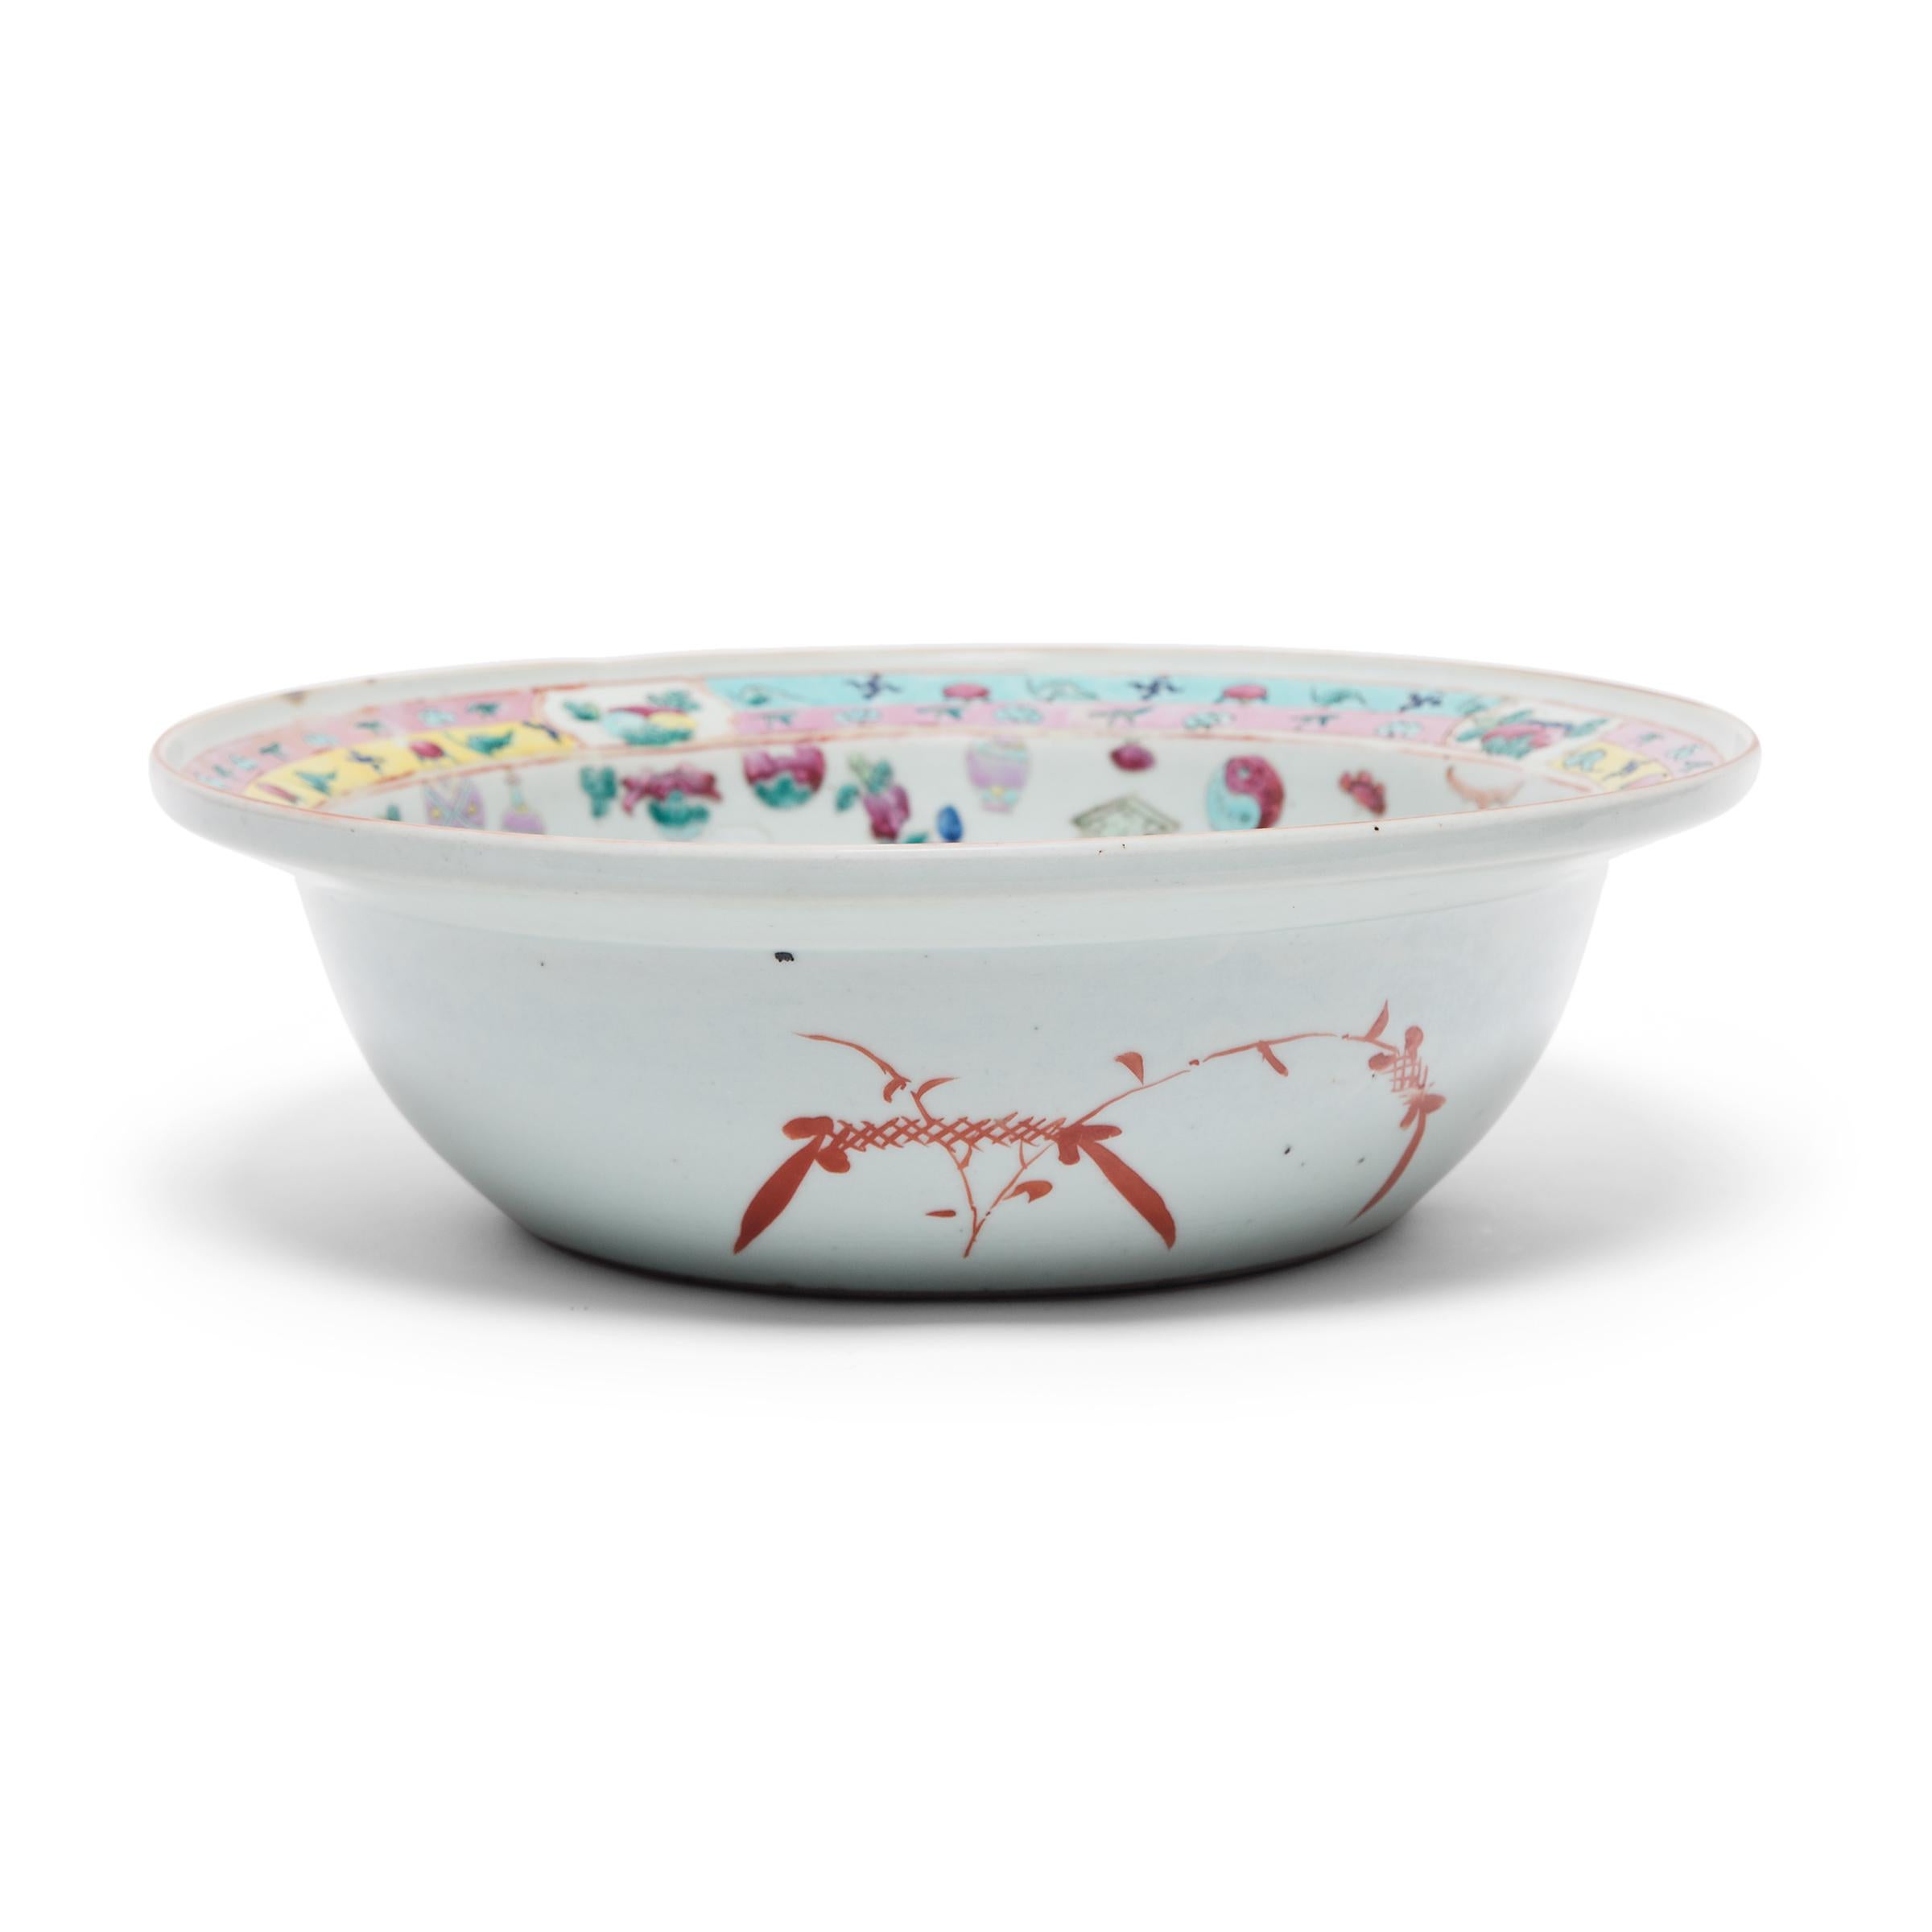 Enameled Chinese Famille Rose Bowl with Scholars' Objects, c. 1850 For Sale